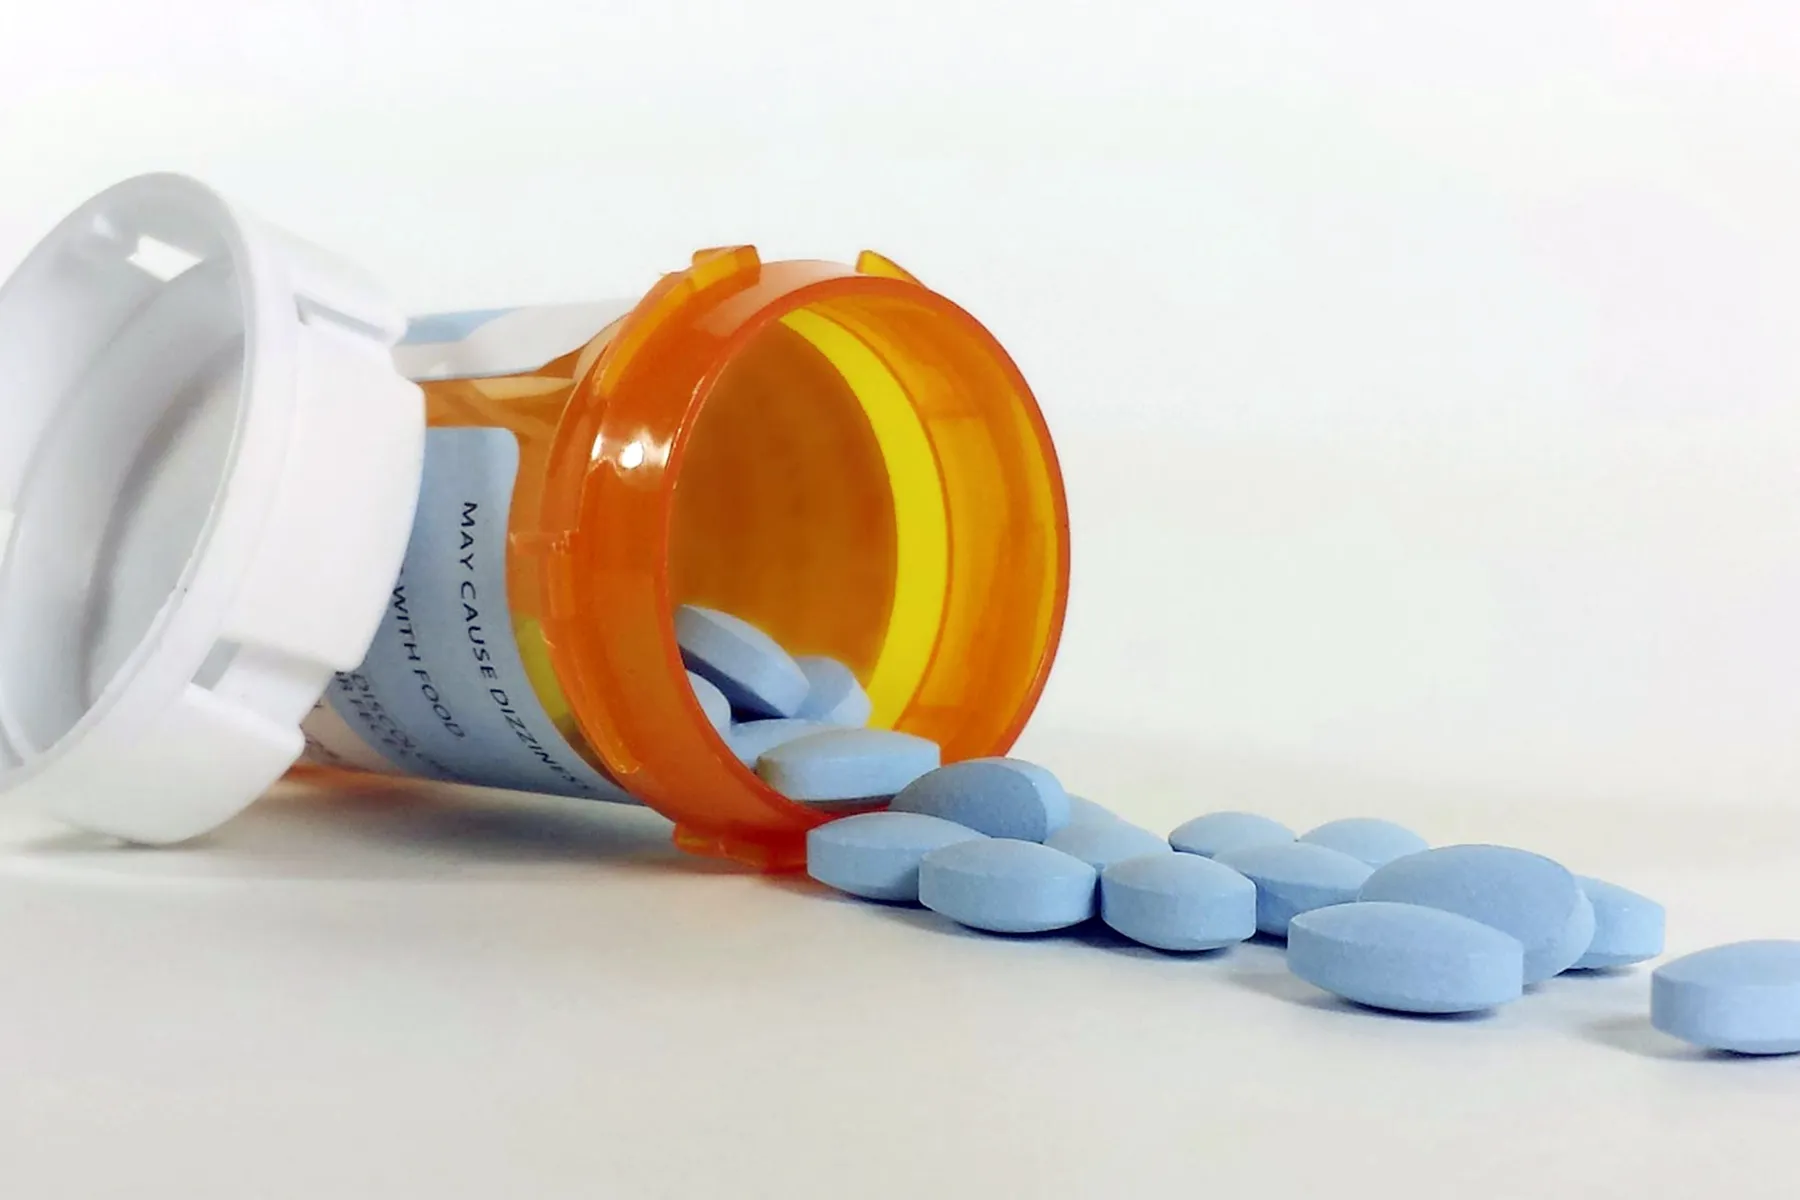 FDA Warns of Websites Selling Adderall Illegally